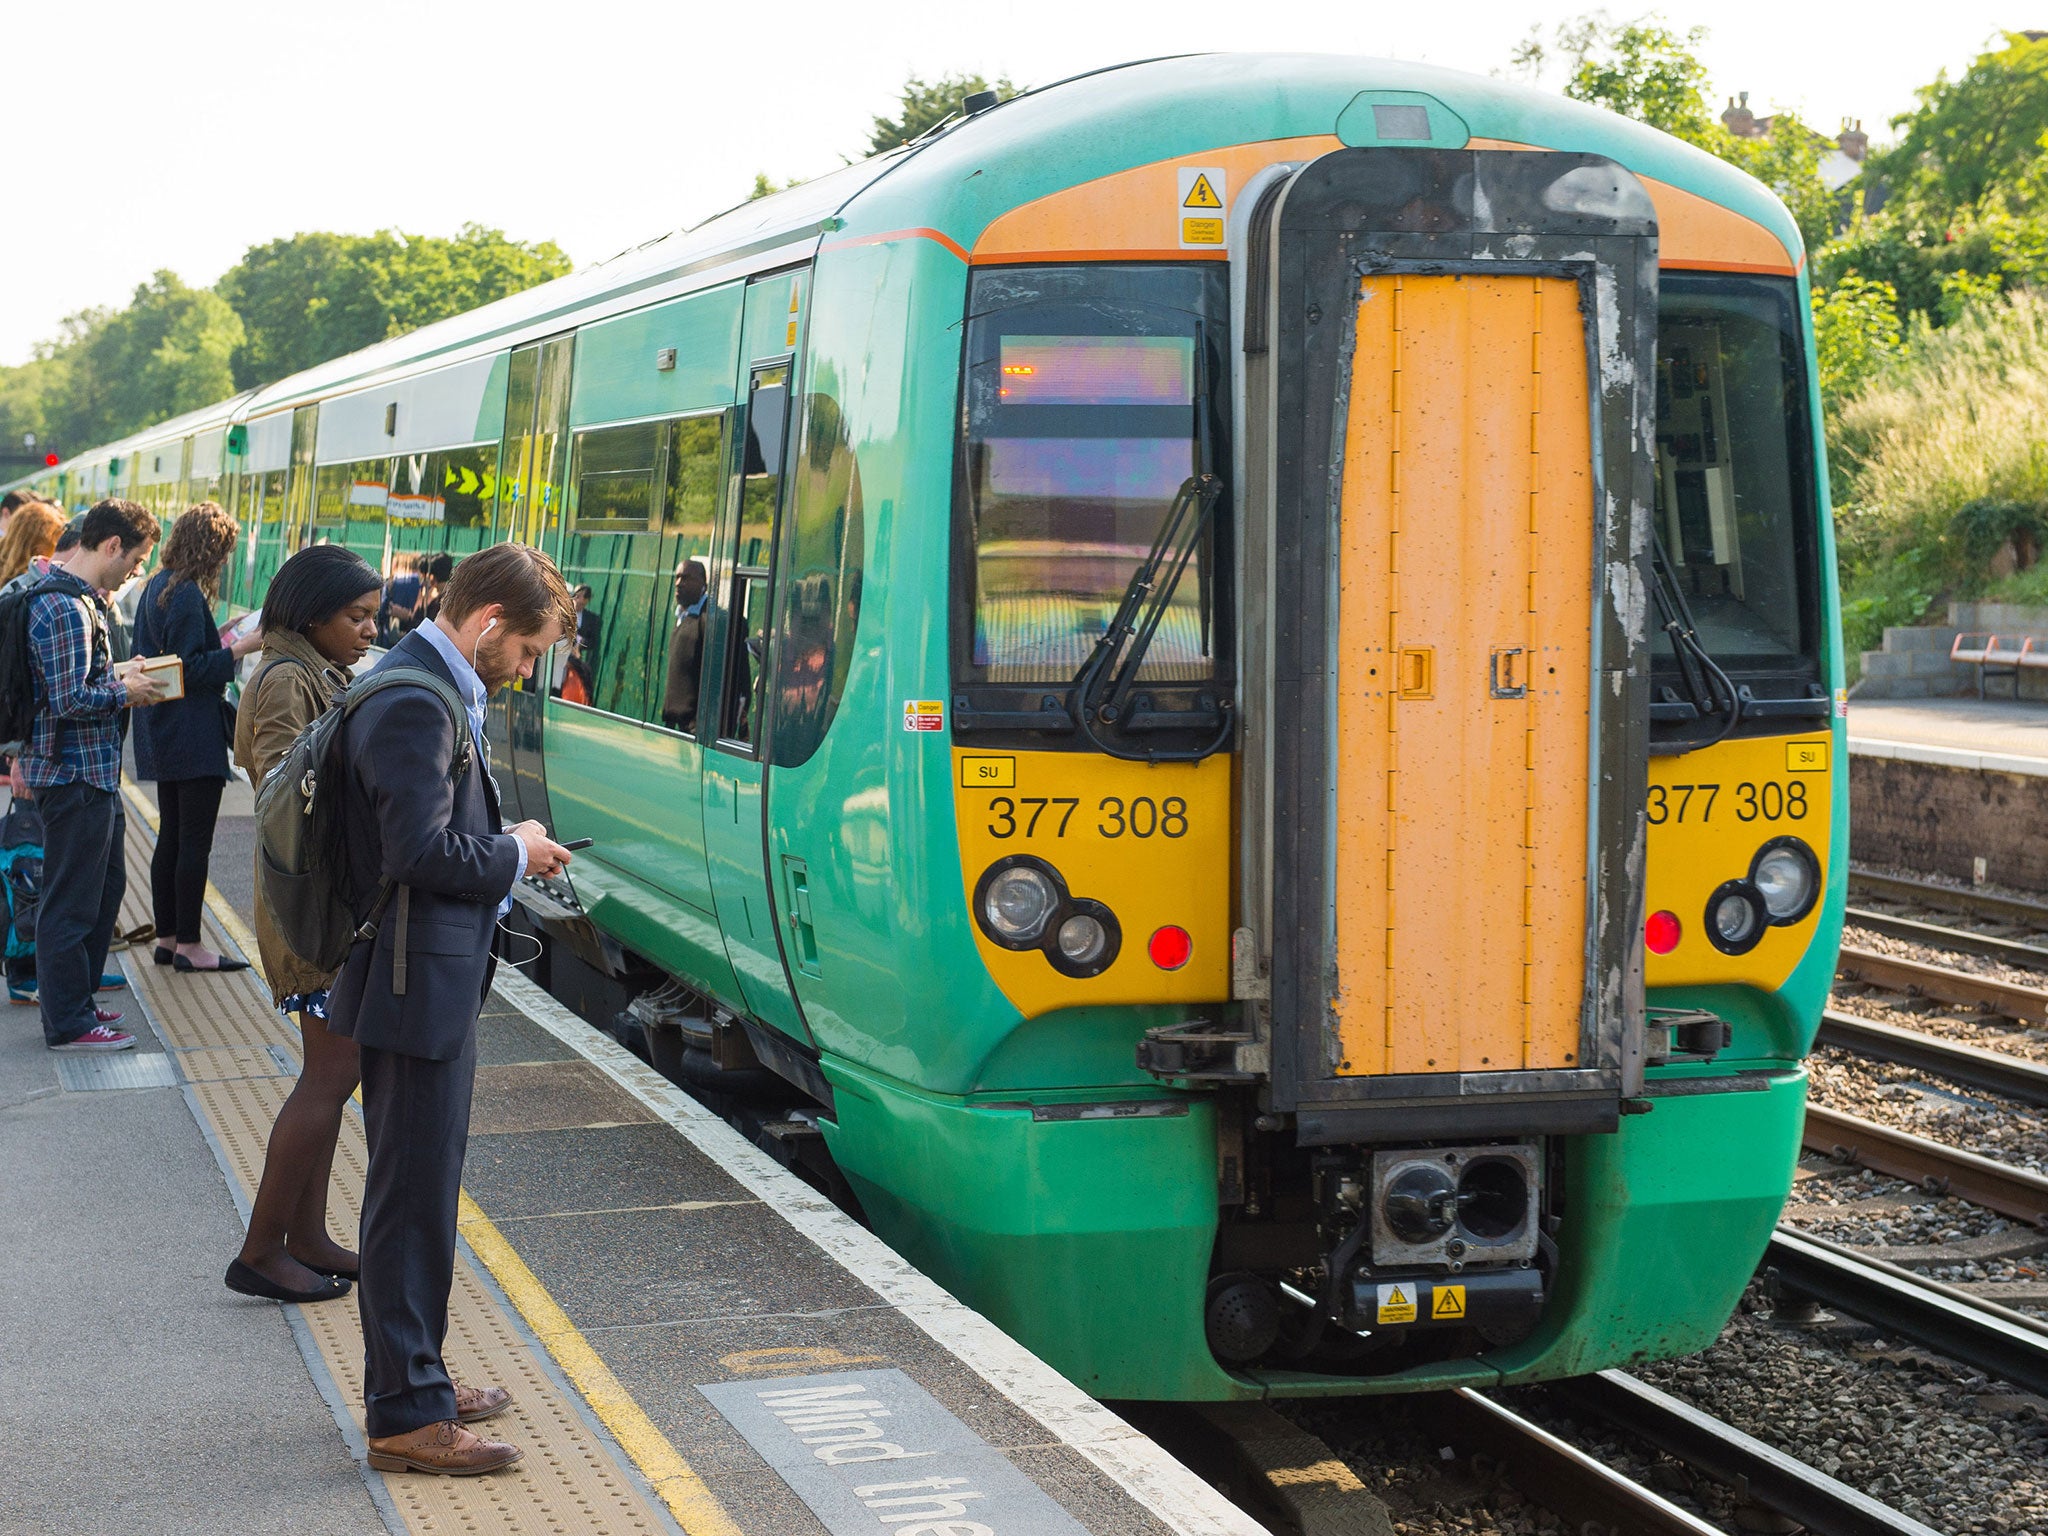 Southern Rail passengers have faced months of delays while the rail operator has seen profits up 25%